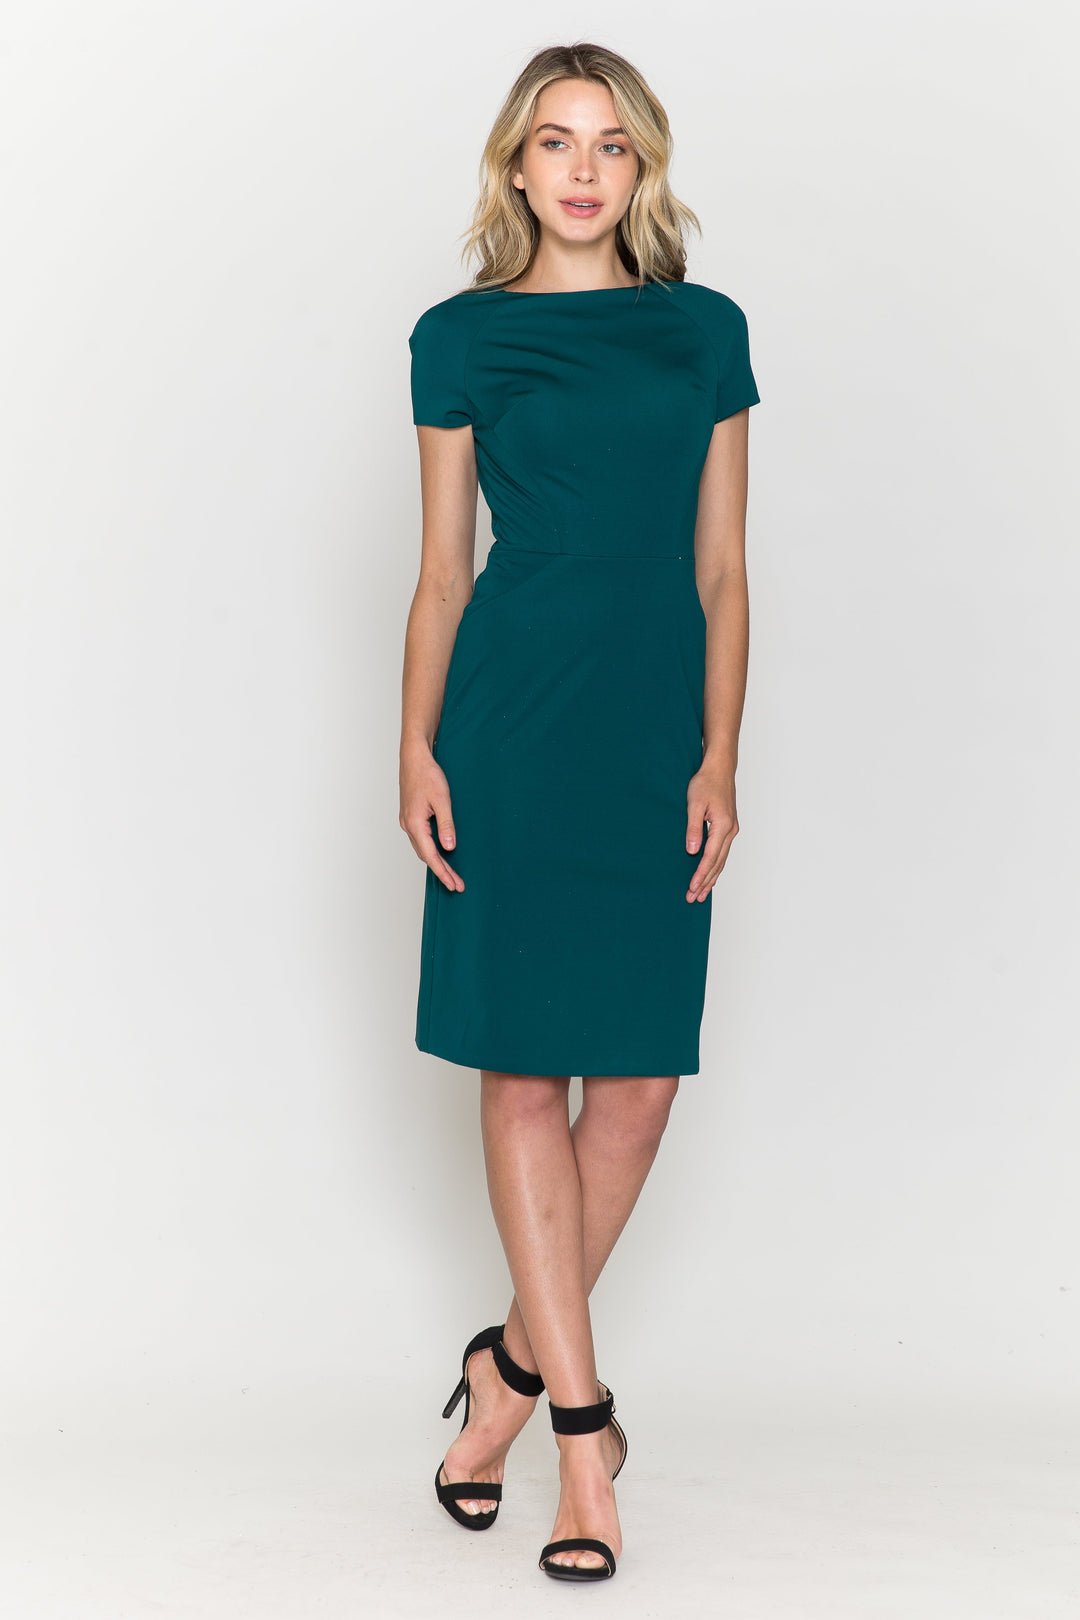 Fitted Short Sleeve Cocktail Dress by Poly USA 8774